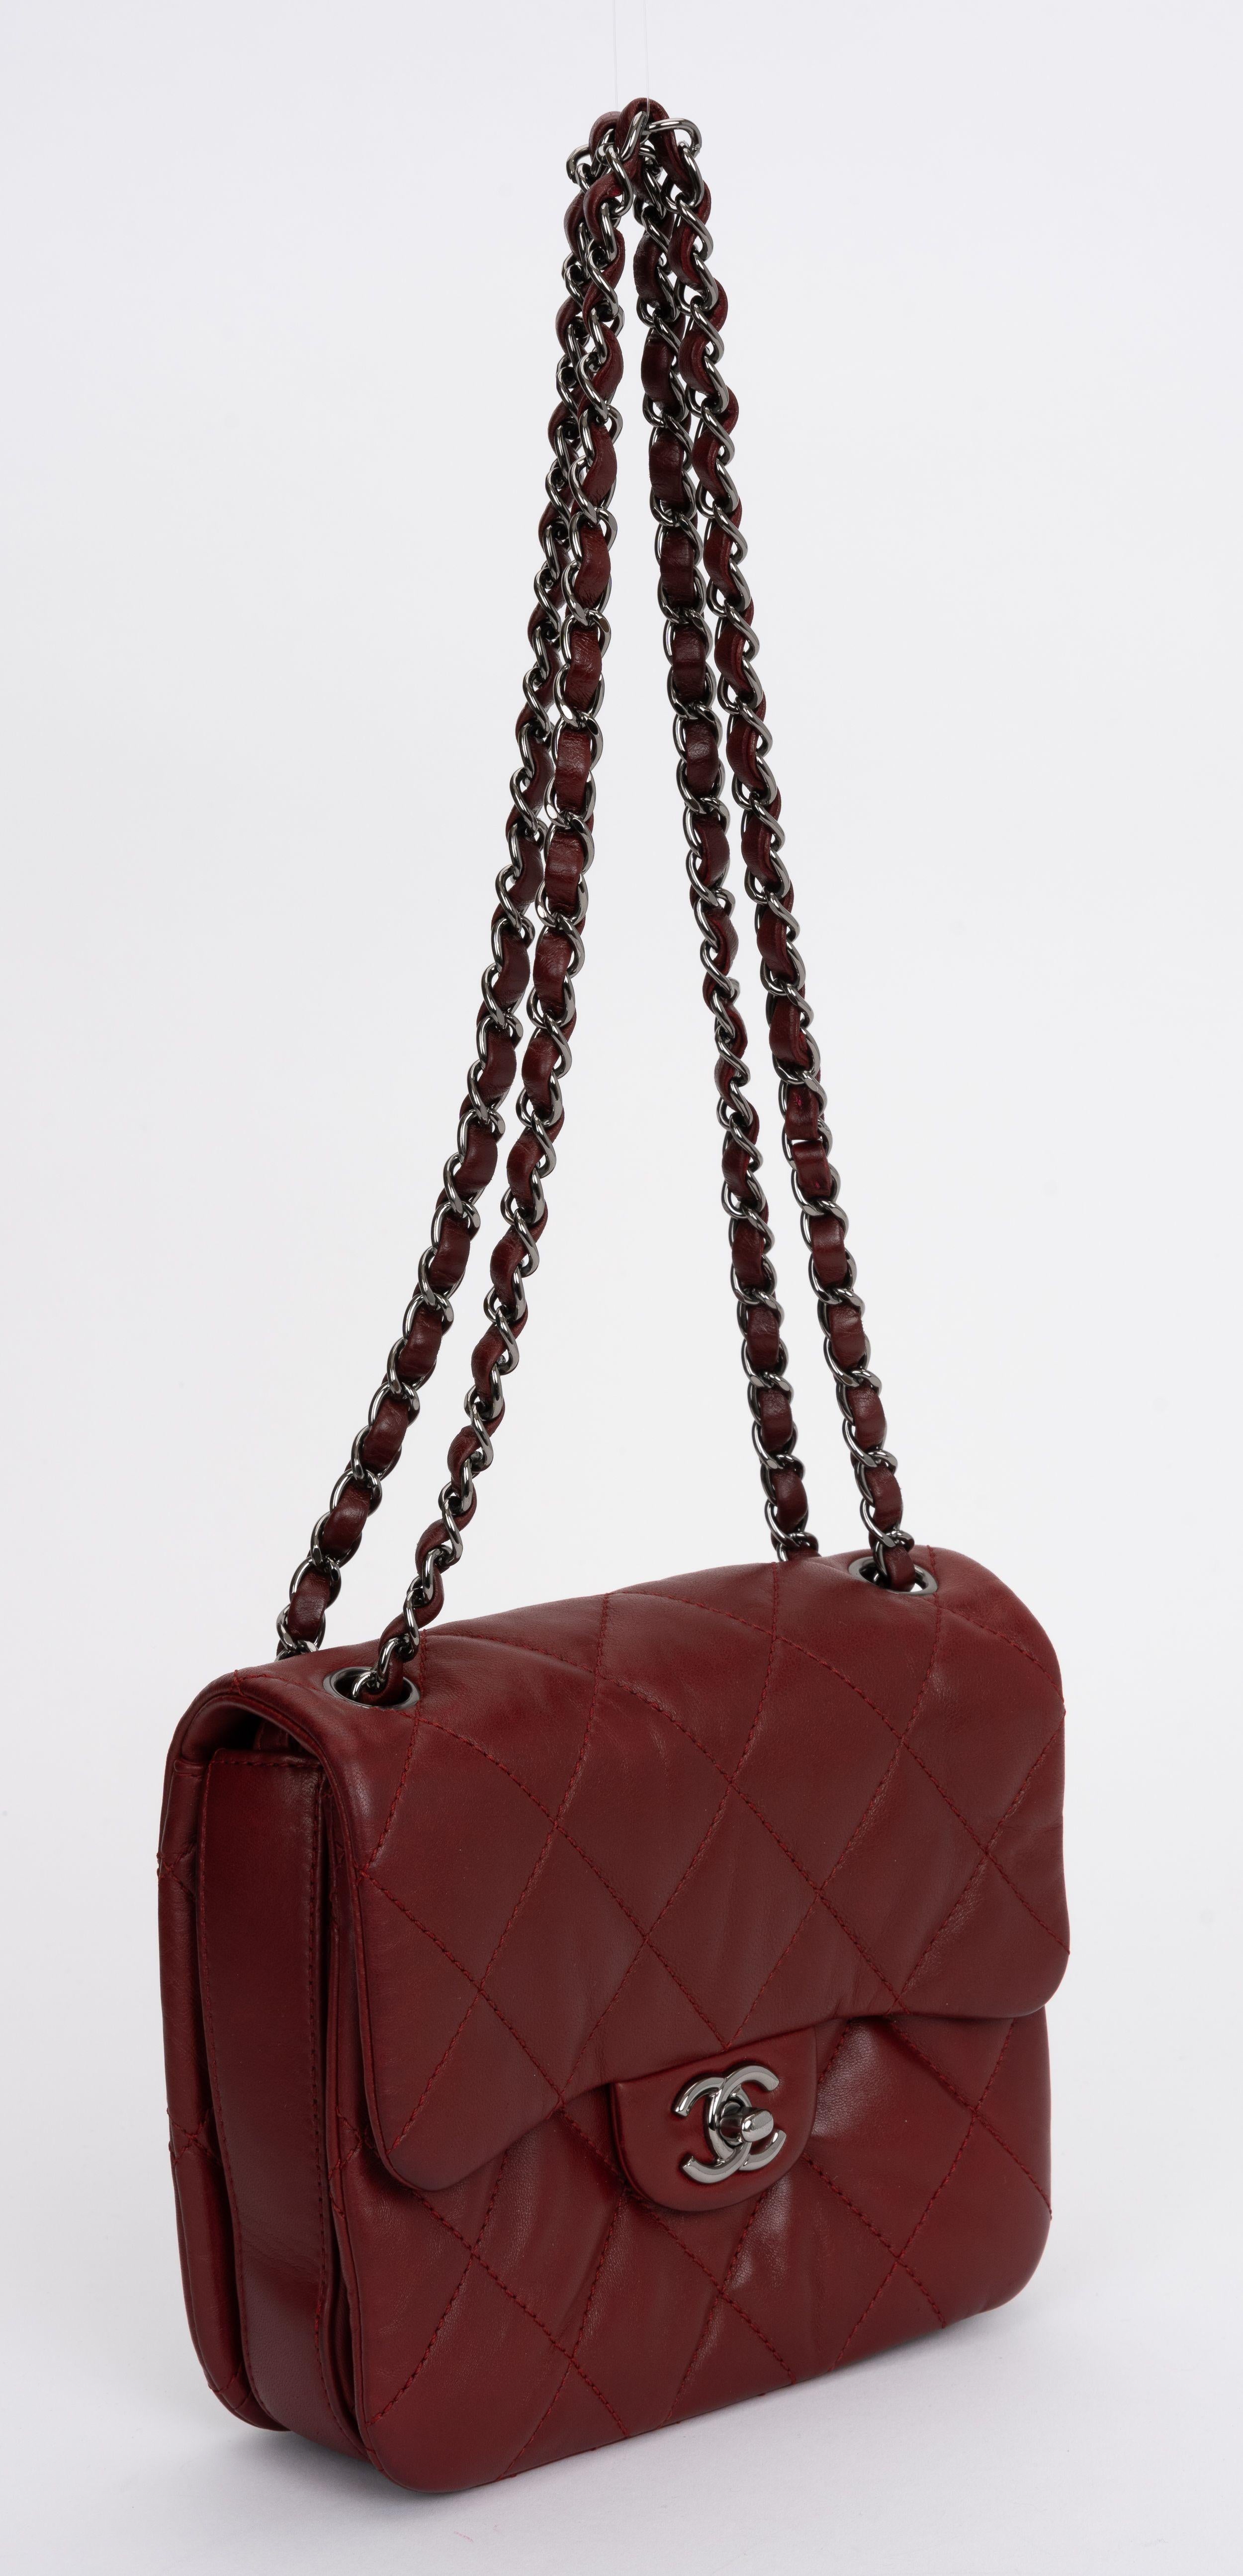 The Chanel Burgundy Red leather Flap Bag features an intertwined leather gunmetal shoulder strap and a CC turn lock closure. One zipper pocket in the interior.
Can be worn cross body or shoulder length.
Shoulder drop 11.5